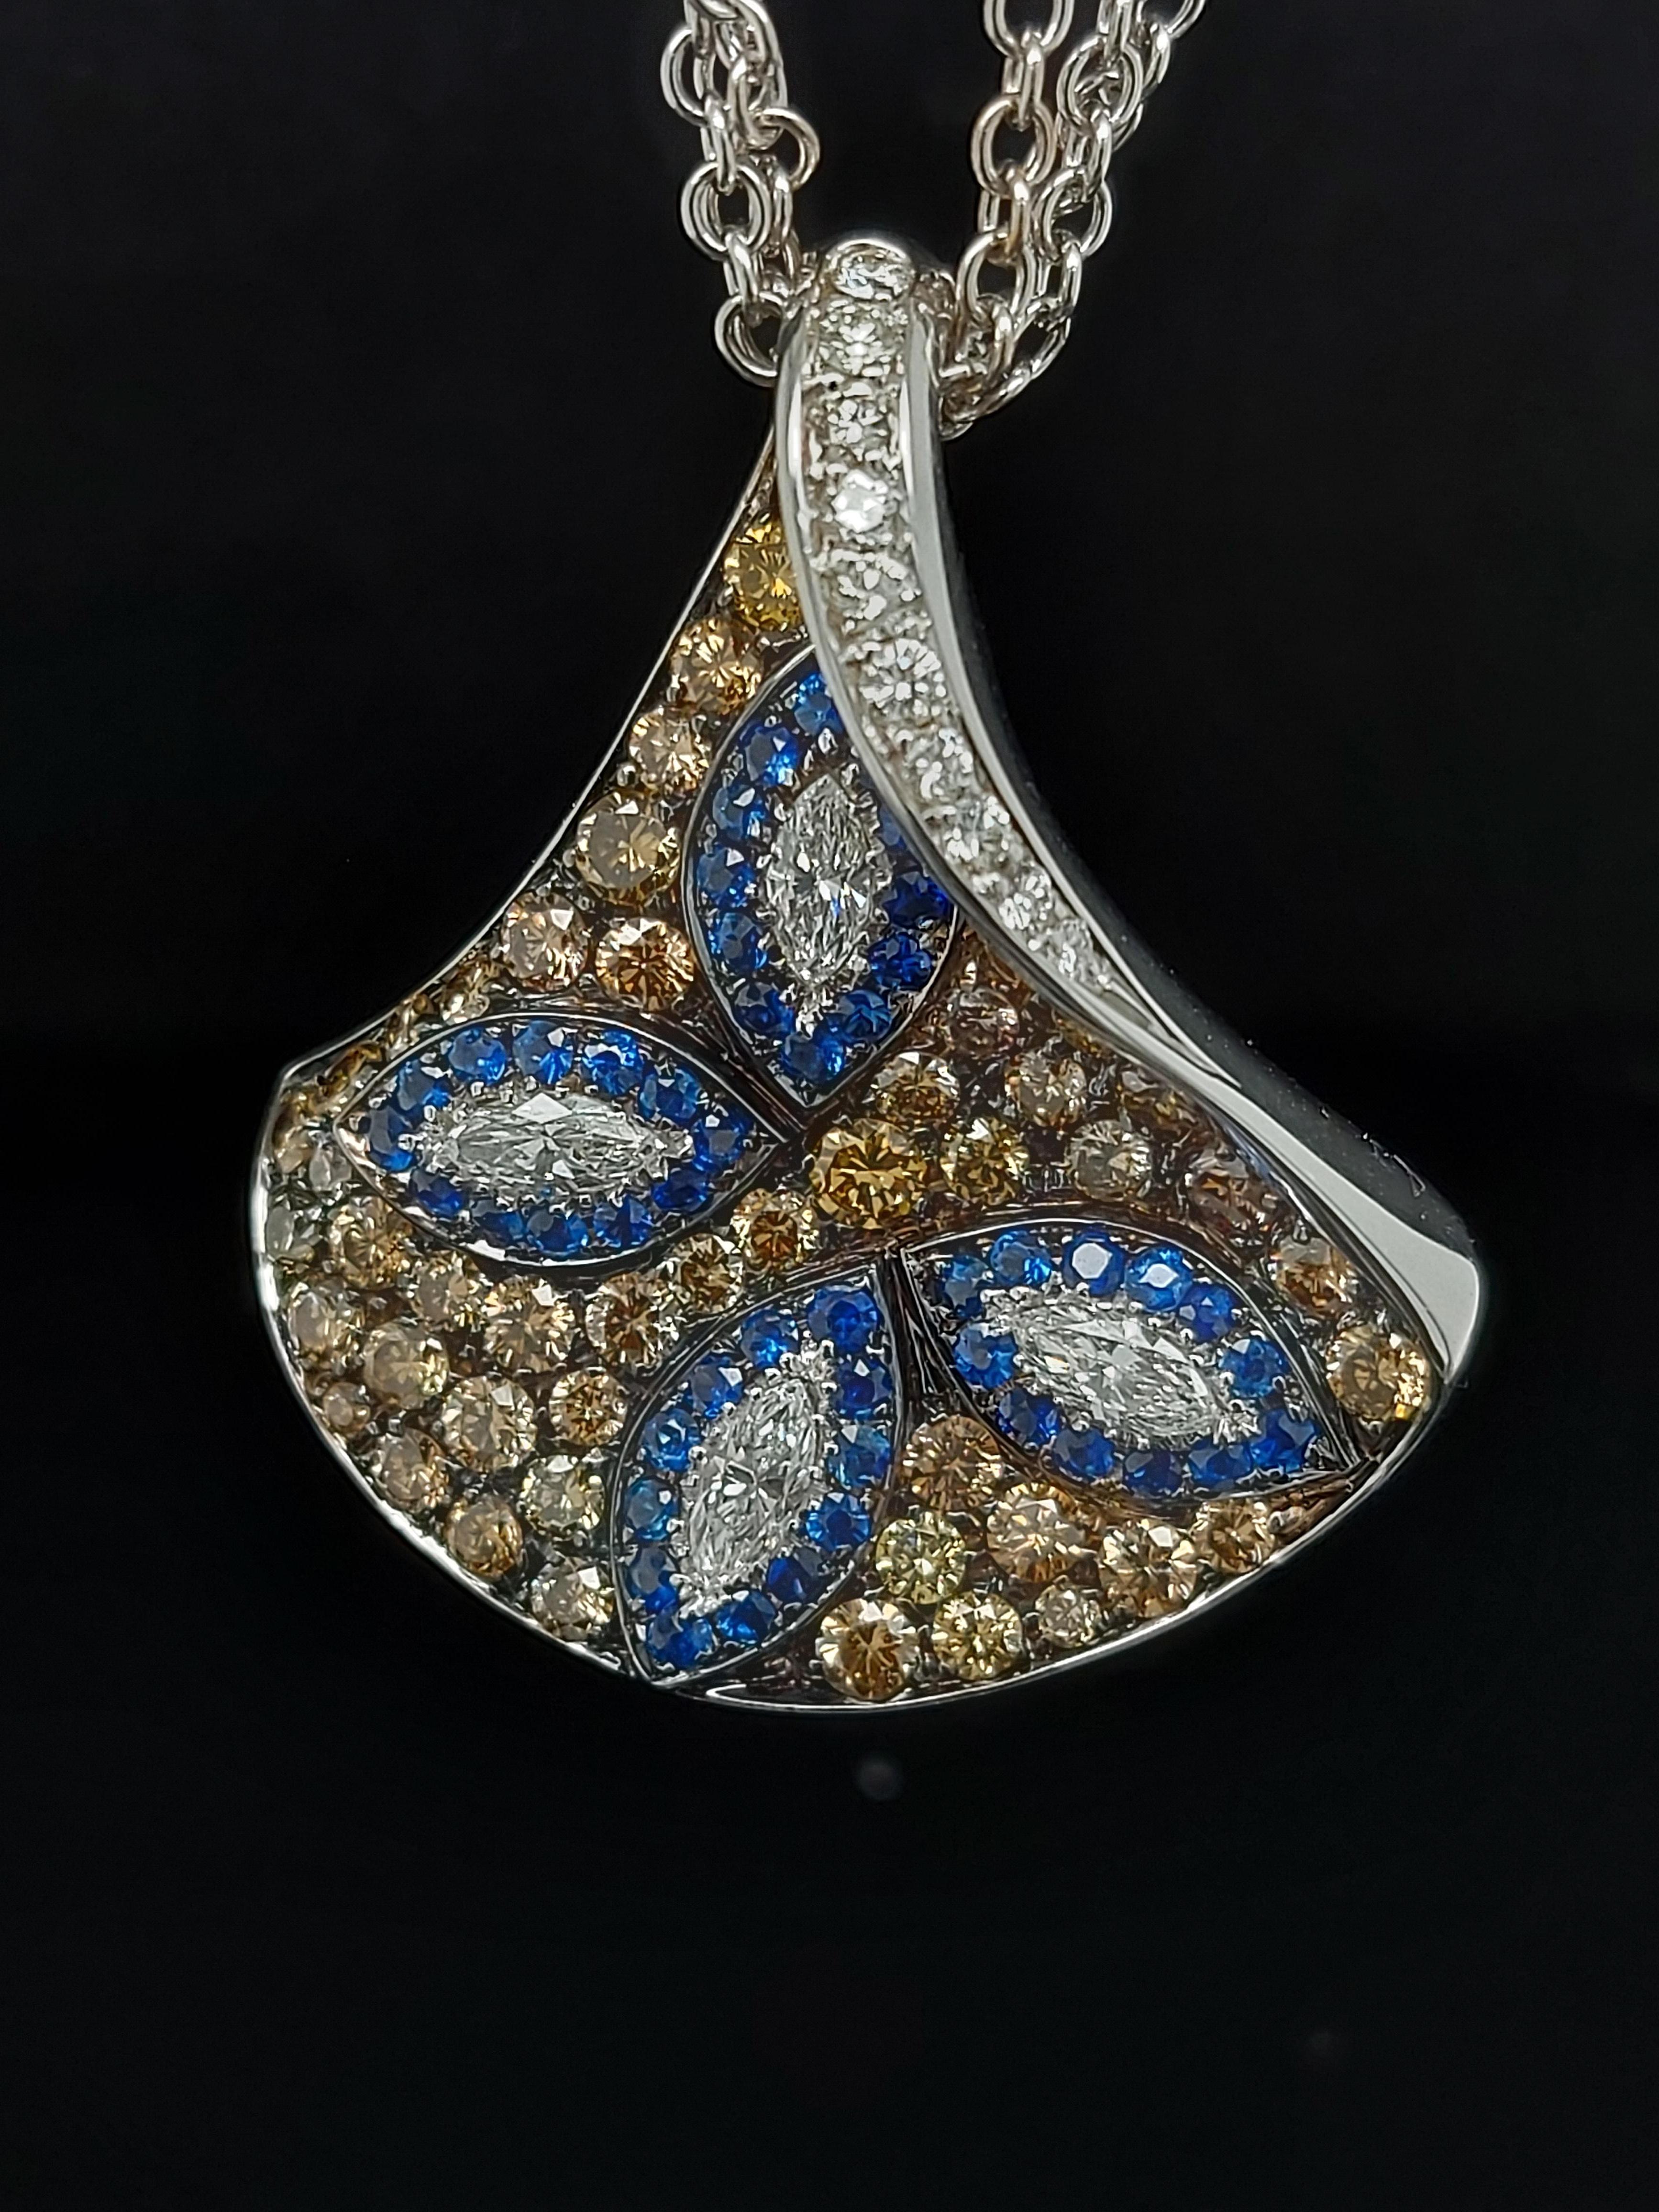 18kt White Gold  White & Brown Diamonds & Sapphire Triangle Pendant Necklace 

Amazing hand crafted necklace. Can be purchased with a matching ring.

Diamonds: Brown and white brilliant and marquise cut diamonds together 3.24 carat

Sapphires: 48